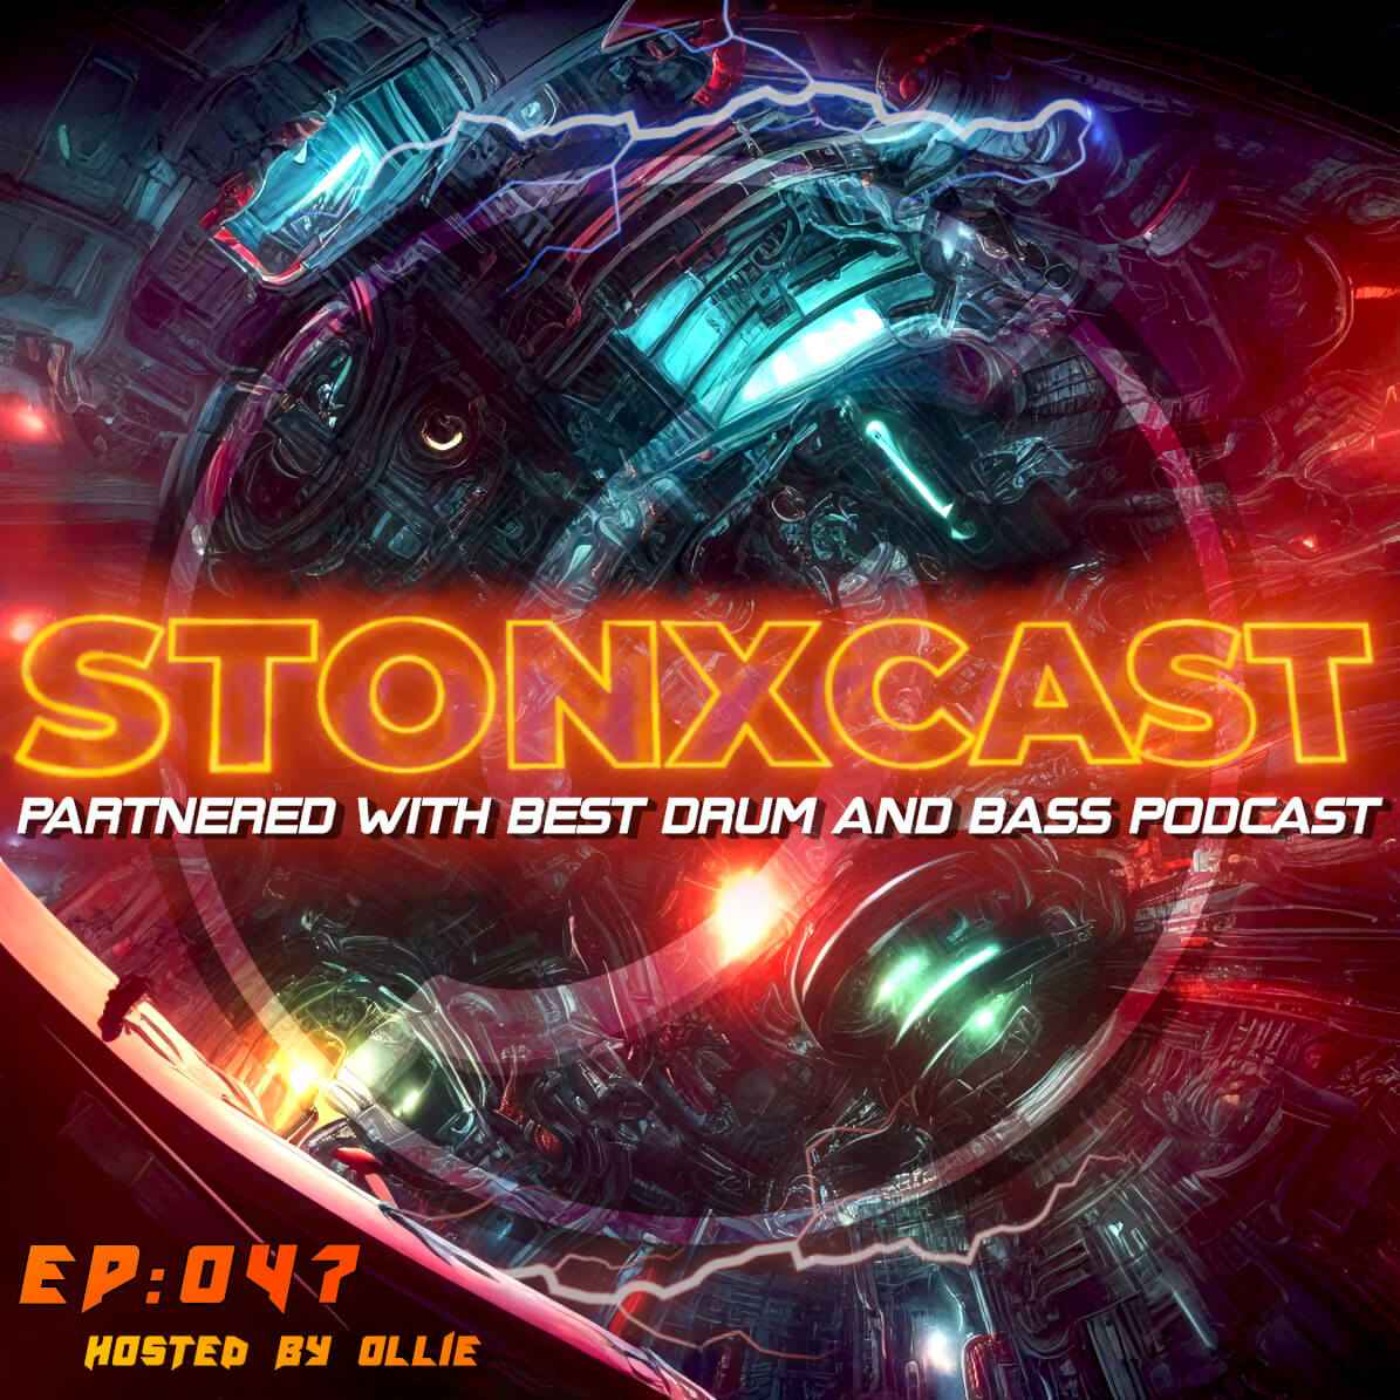 Stonxcast EP:047 - Hosted by Ollie Artwork